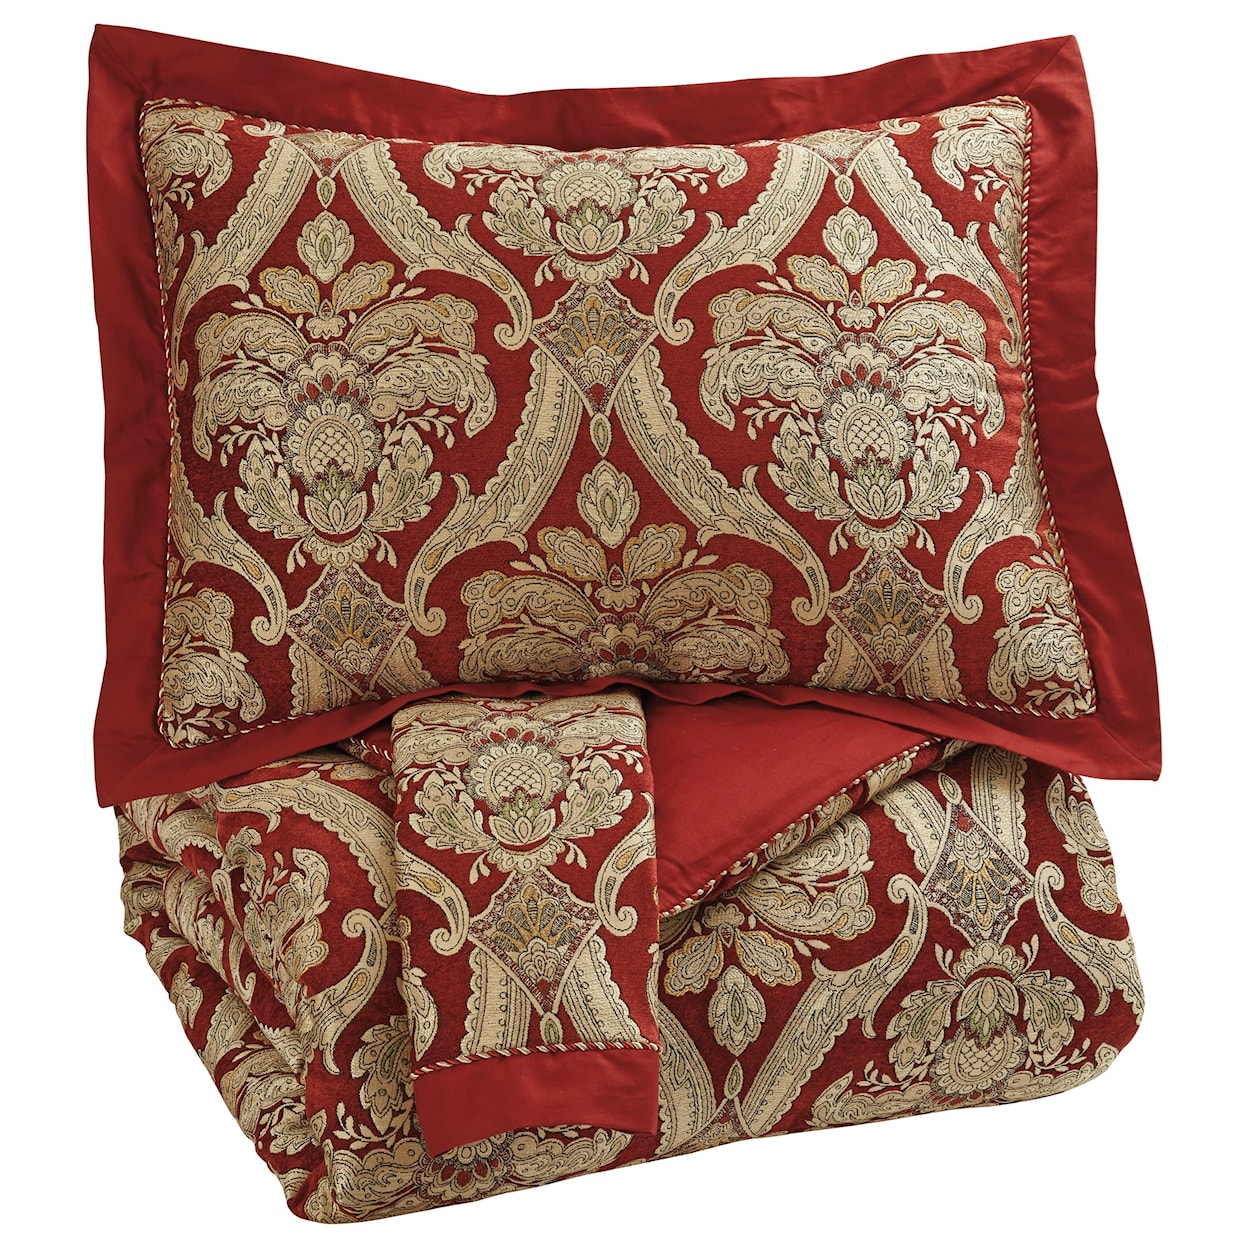 Signature Design by Ashley Furniture Bedding Sets Queen Asasia Scarlet Comforter Set